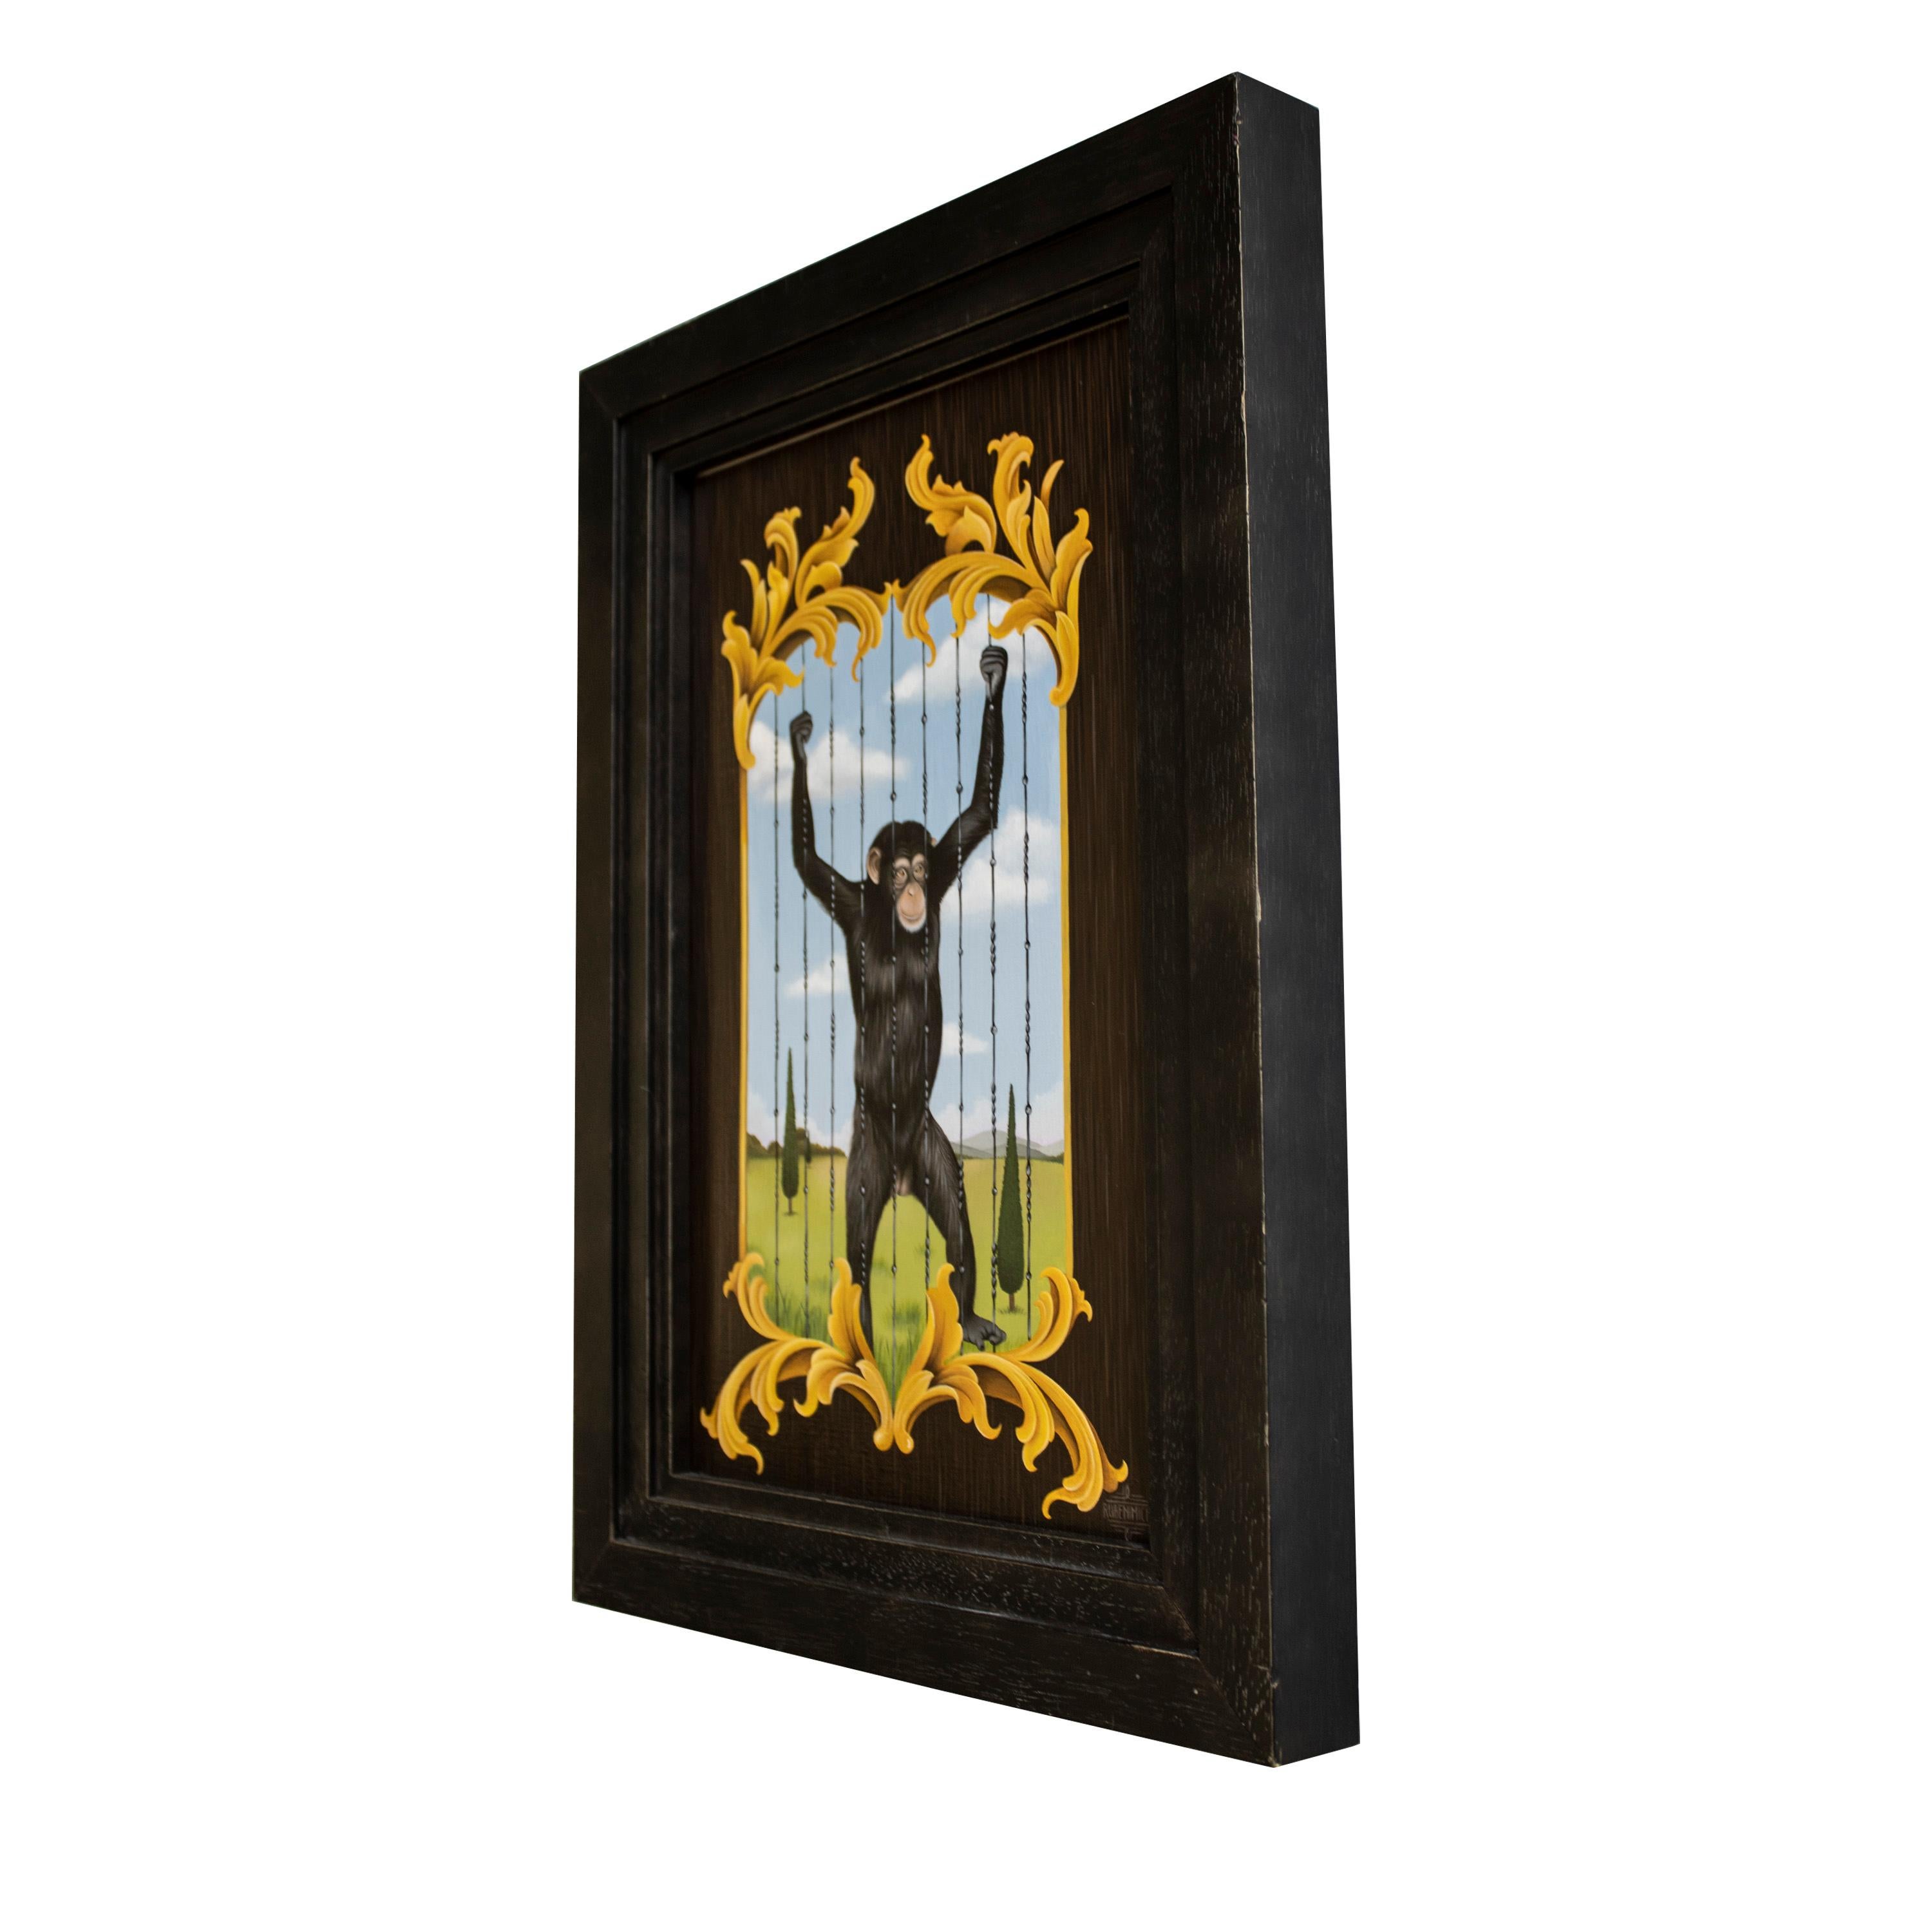 Contemporary painting, Circus, by Spanish artists Rubenimichi, Acrylic on canvas, with a thick lacquered wood frame.

Measurements:
Painting: 28×44 (H) cm 
Frame: 44 x 3.5 x 60 (H) cm.